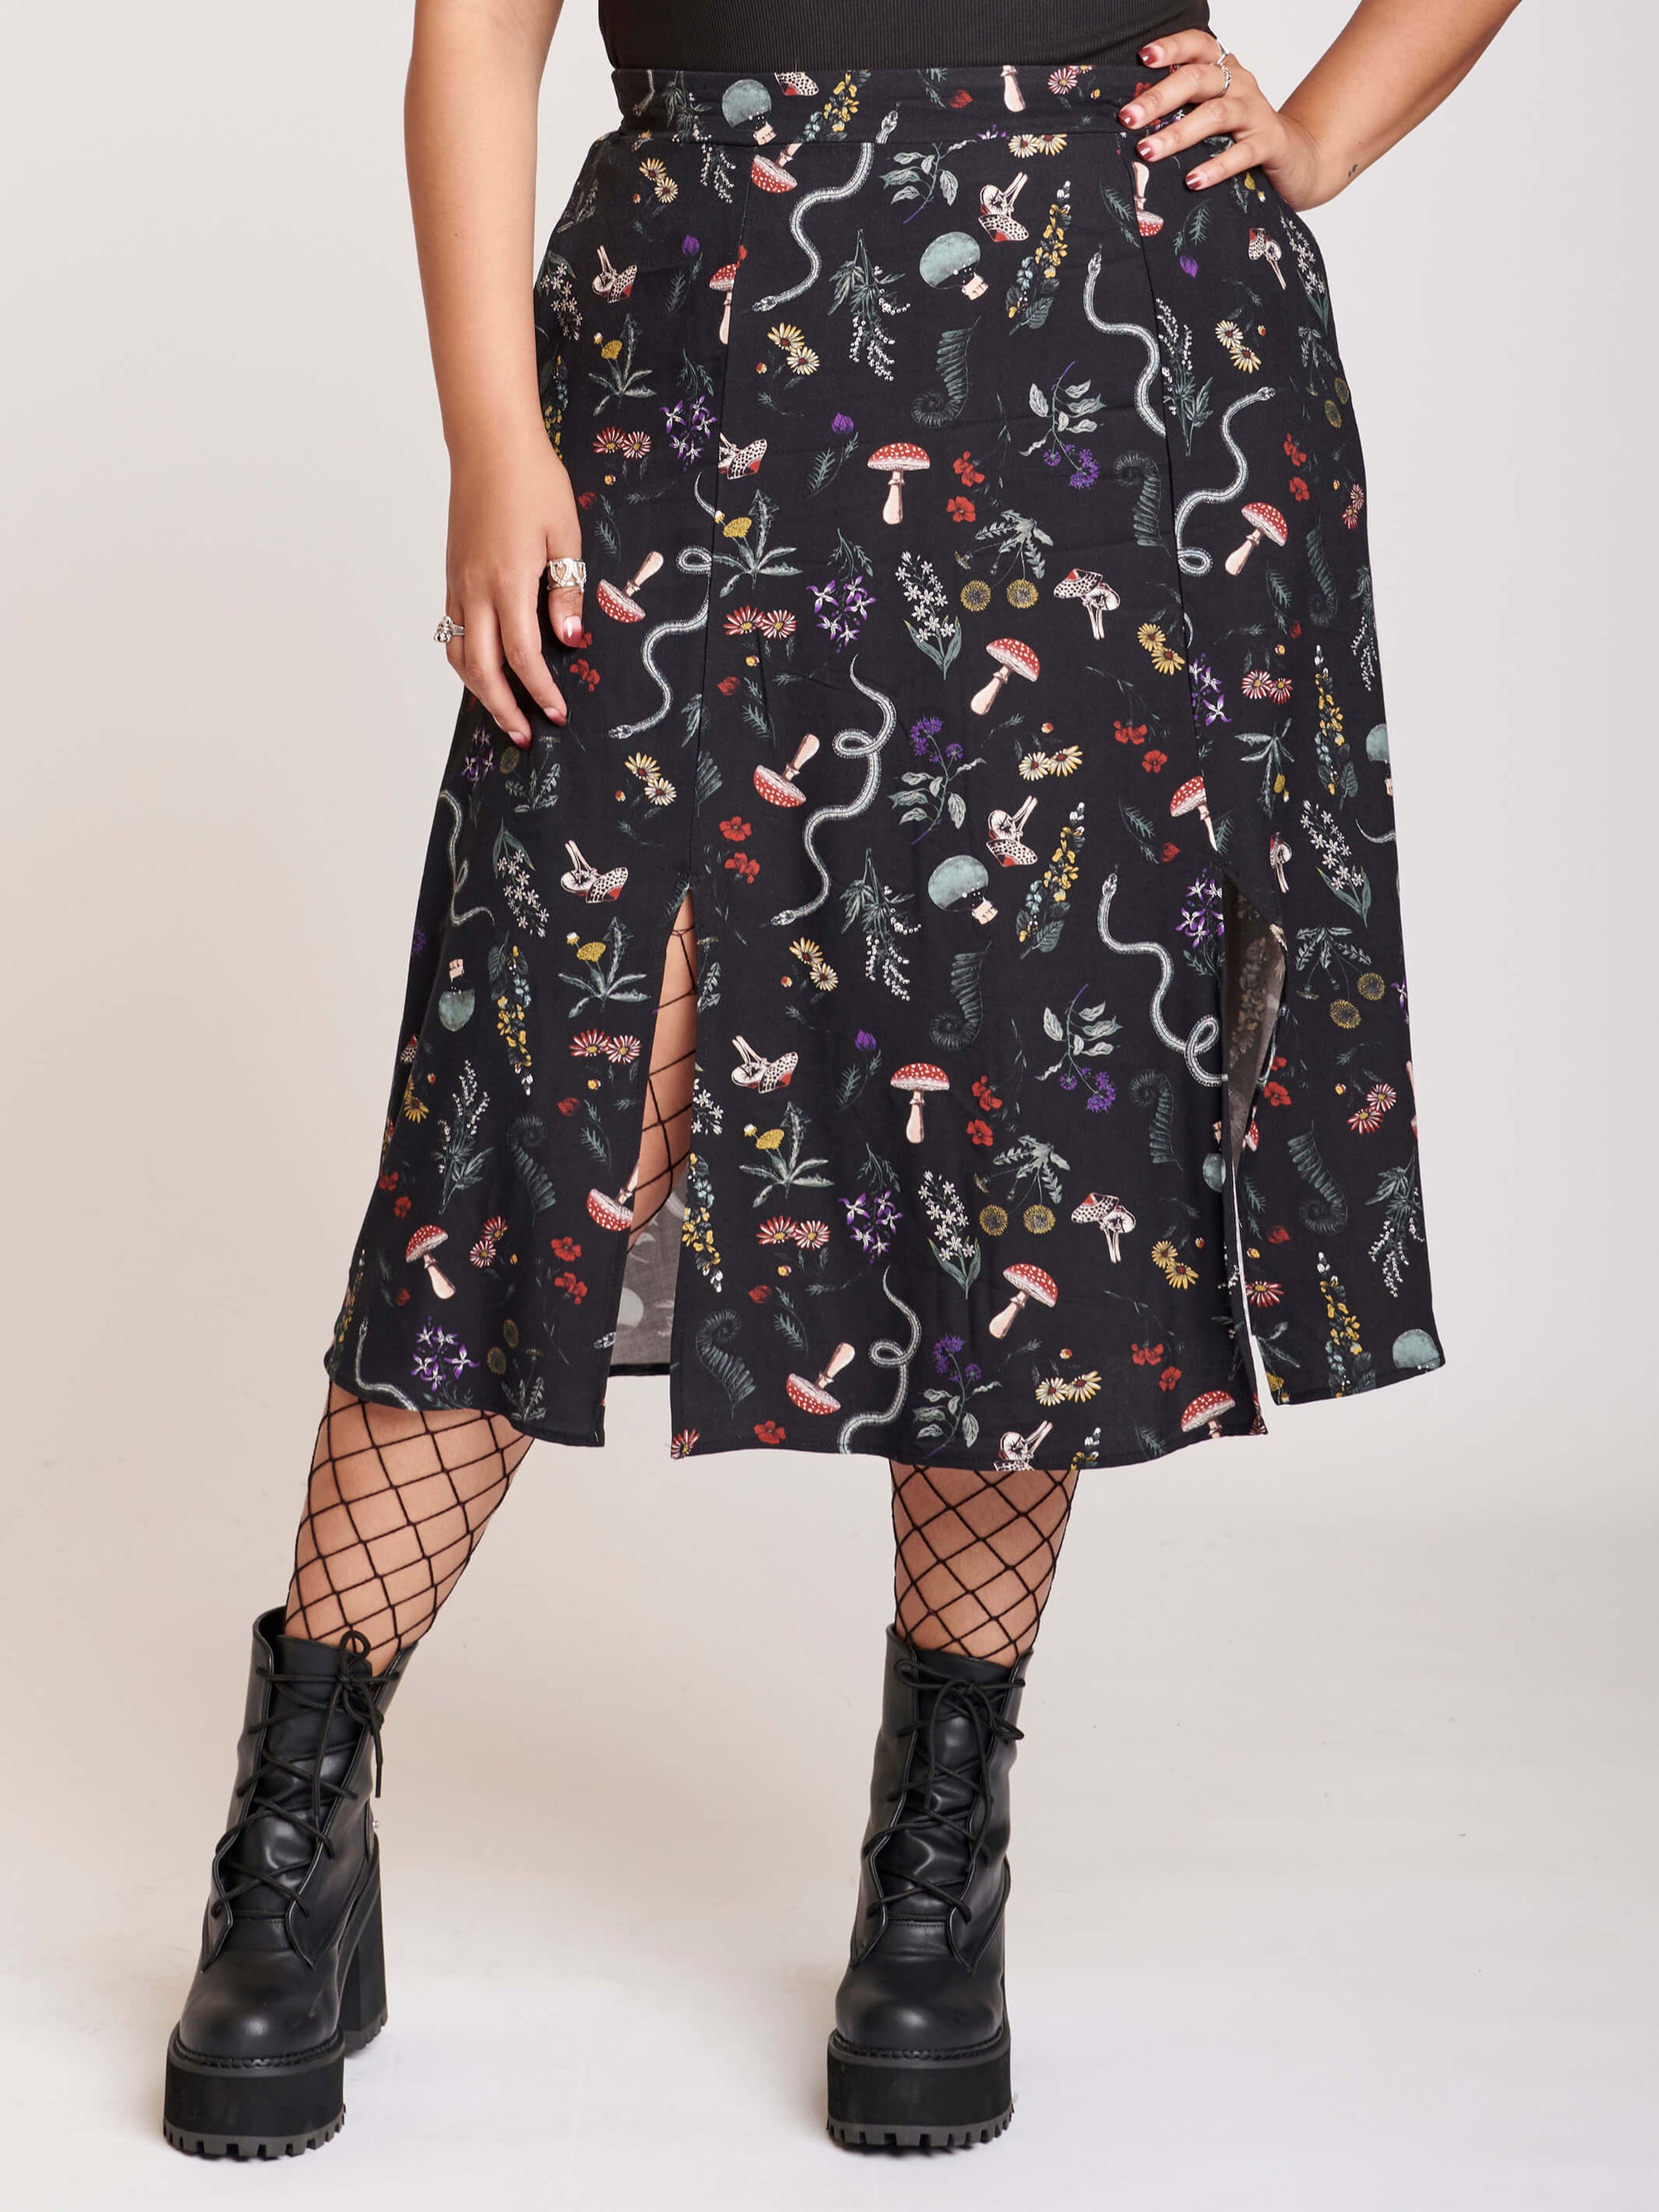 midi lenght skirt with botanical print and 2 front slits